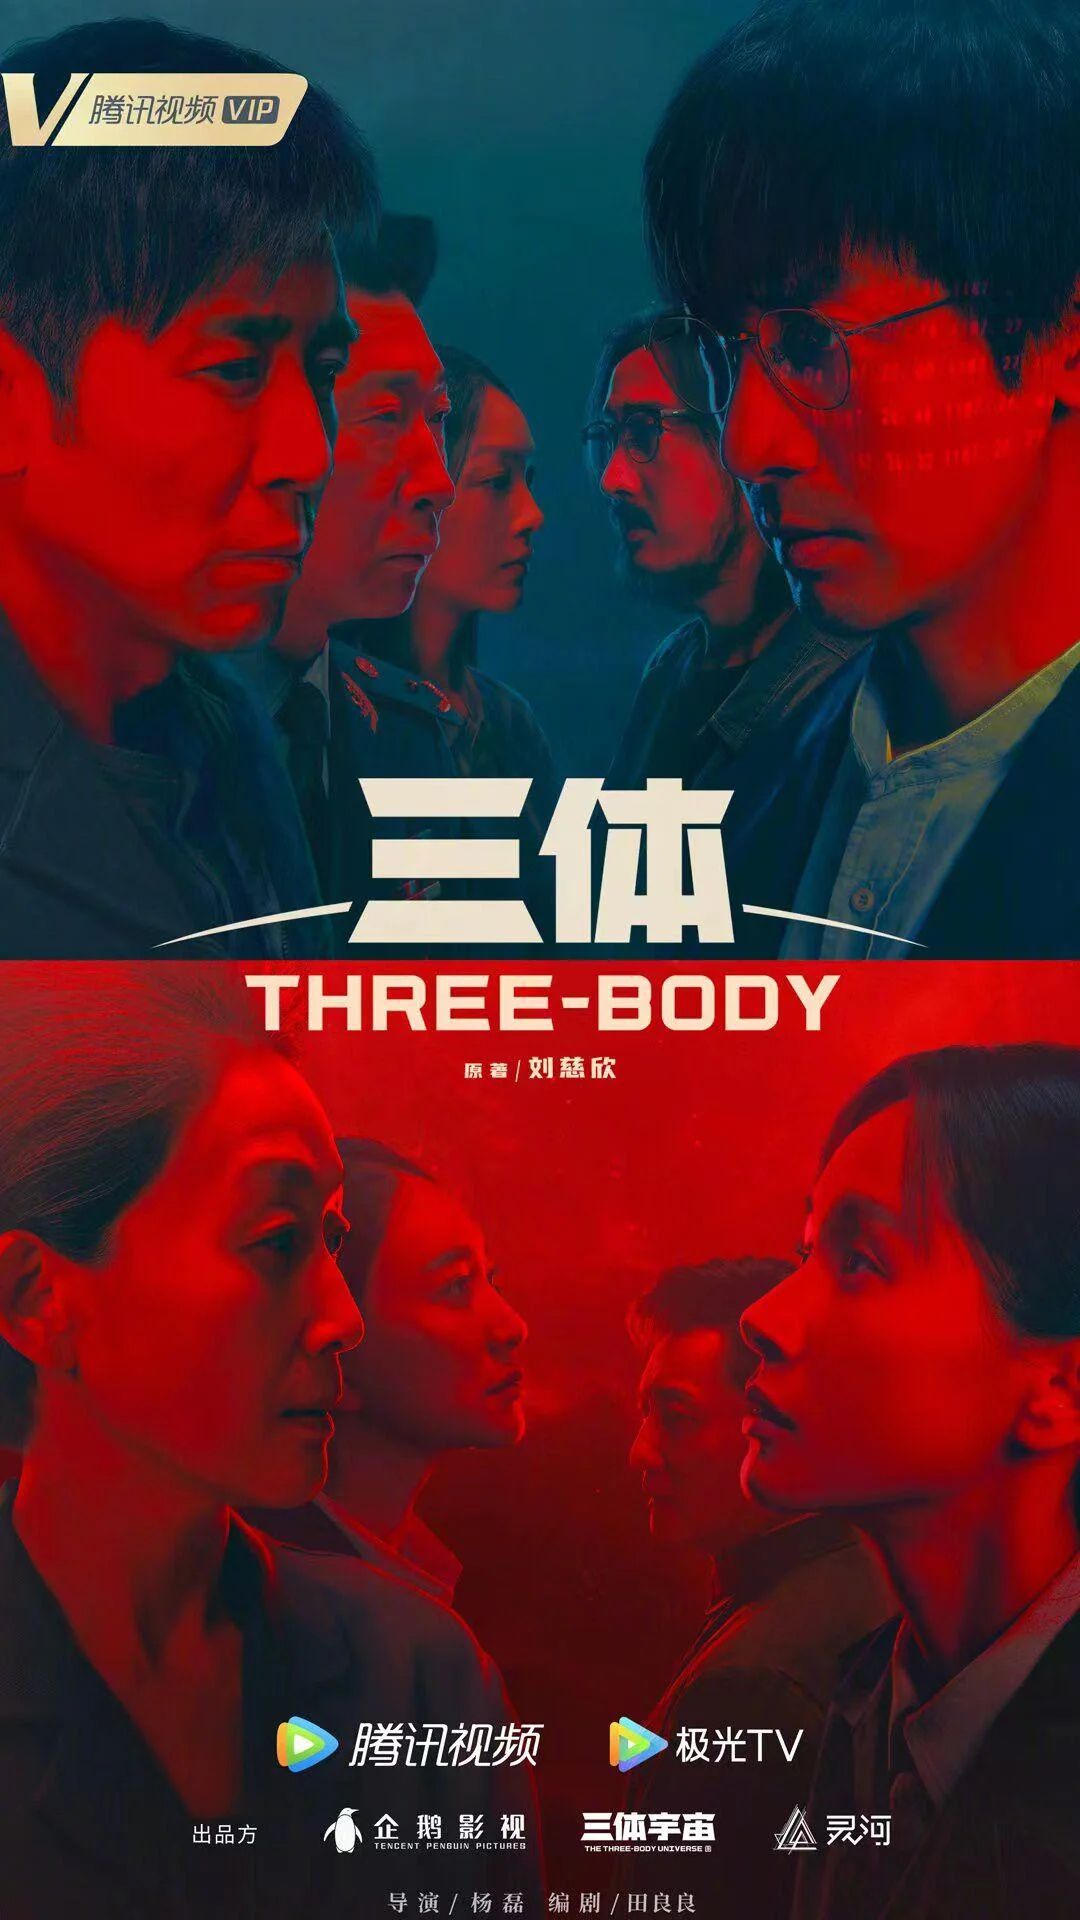 Official poster for the Chinese drama Three-Body